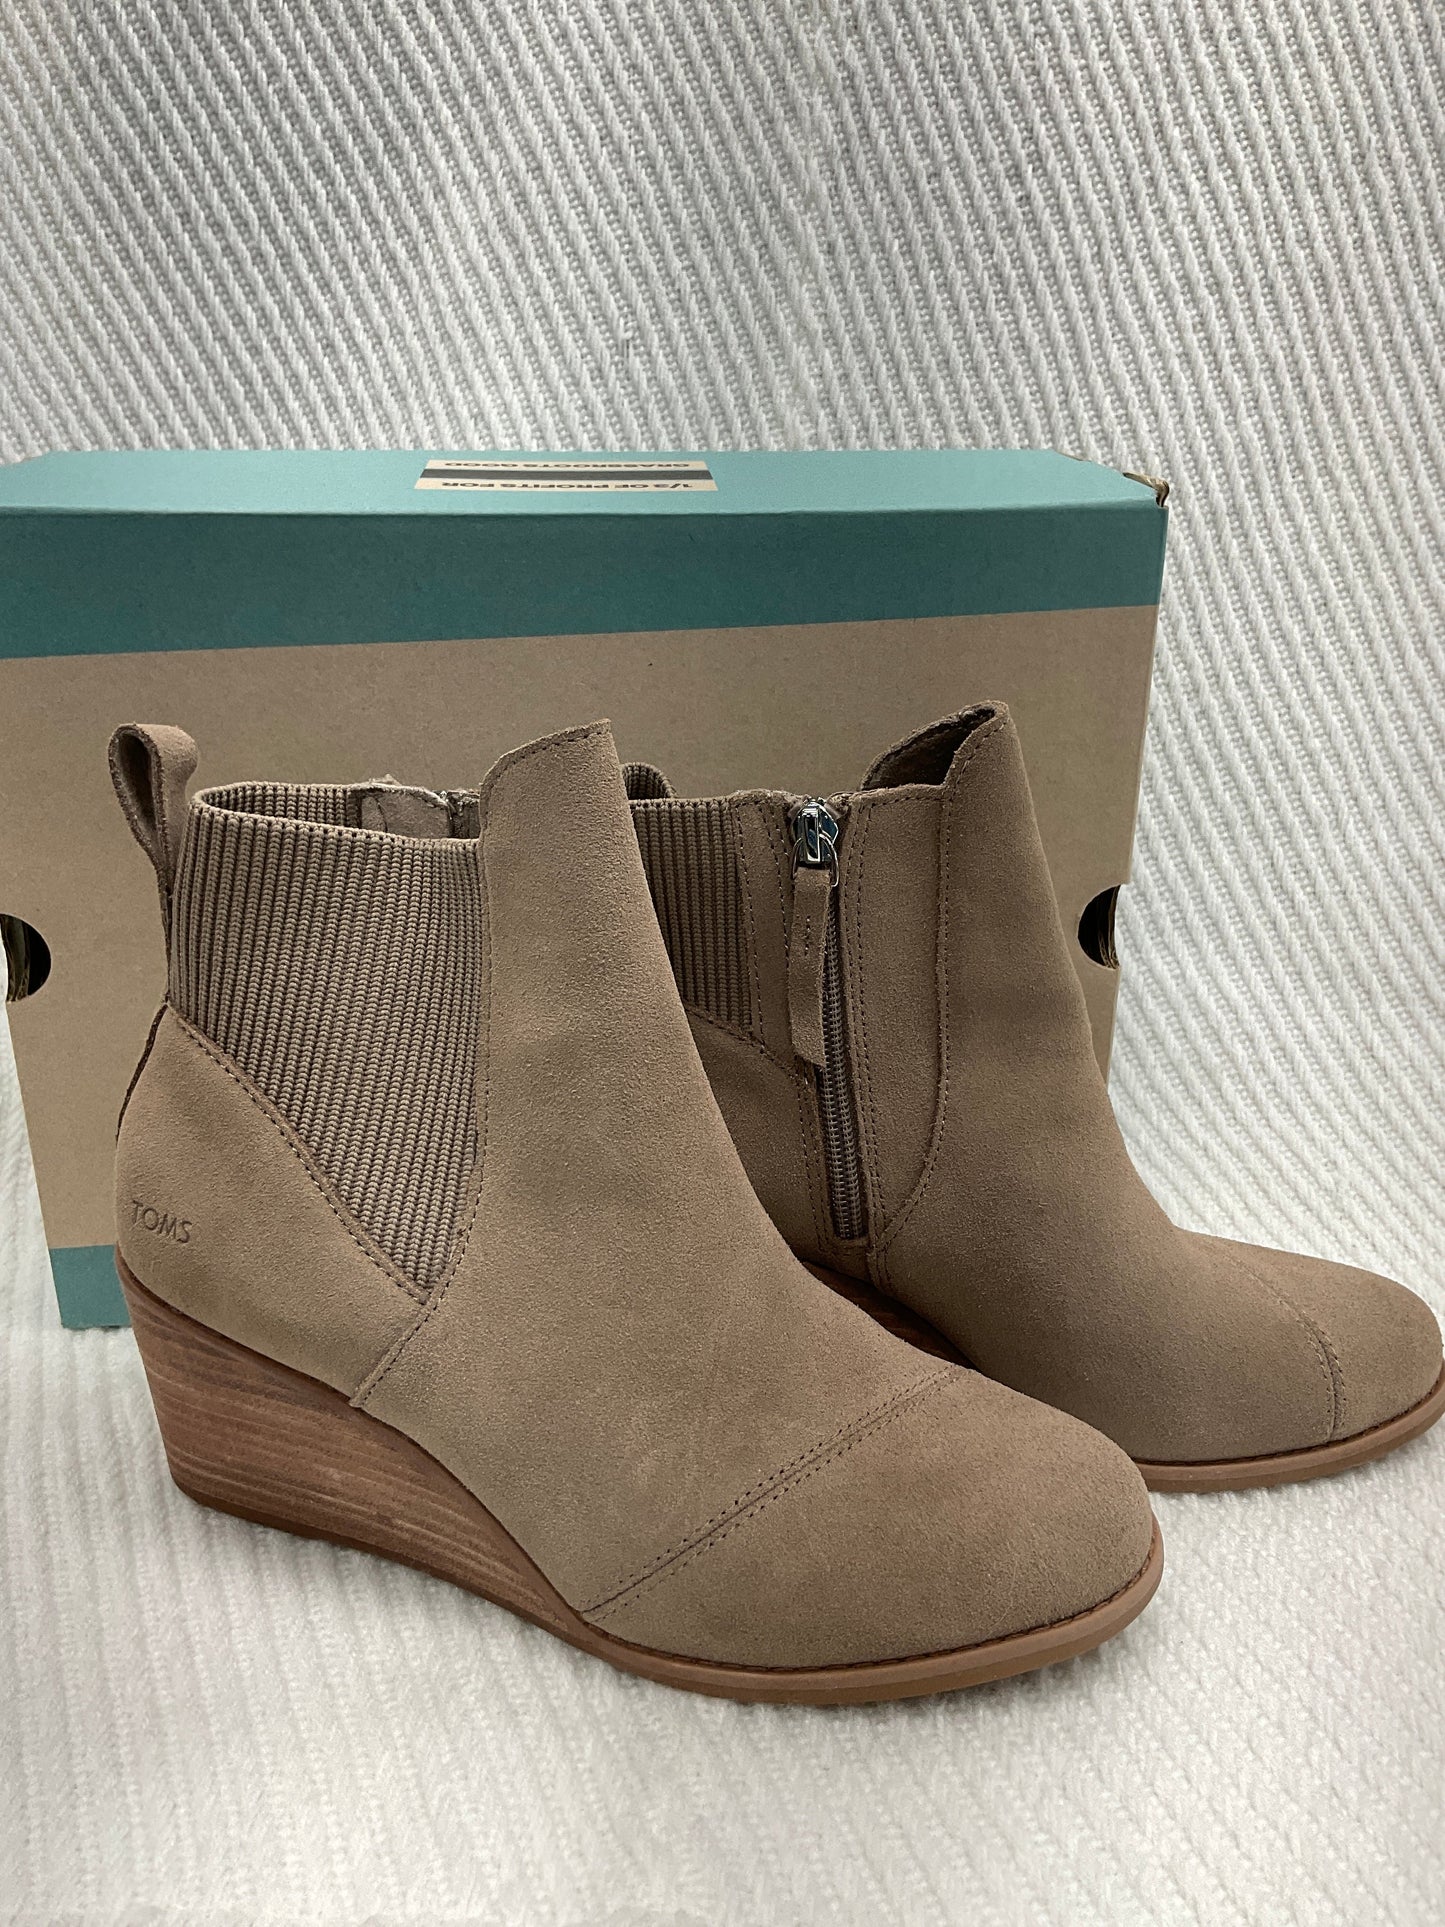 Boots Ankle Heels By Toms  Size: 6.5